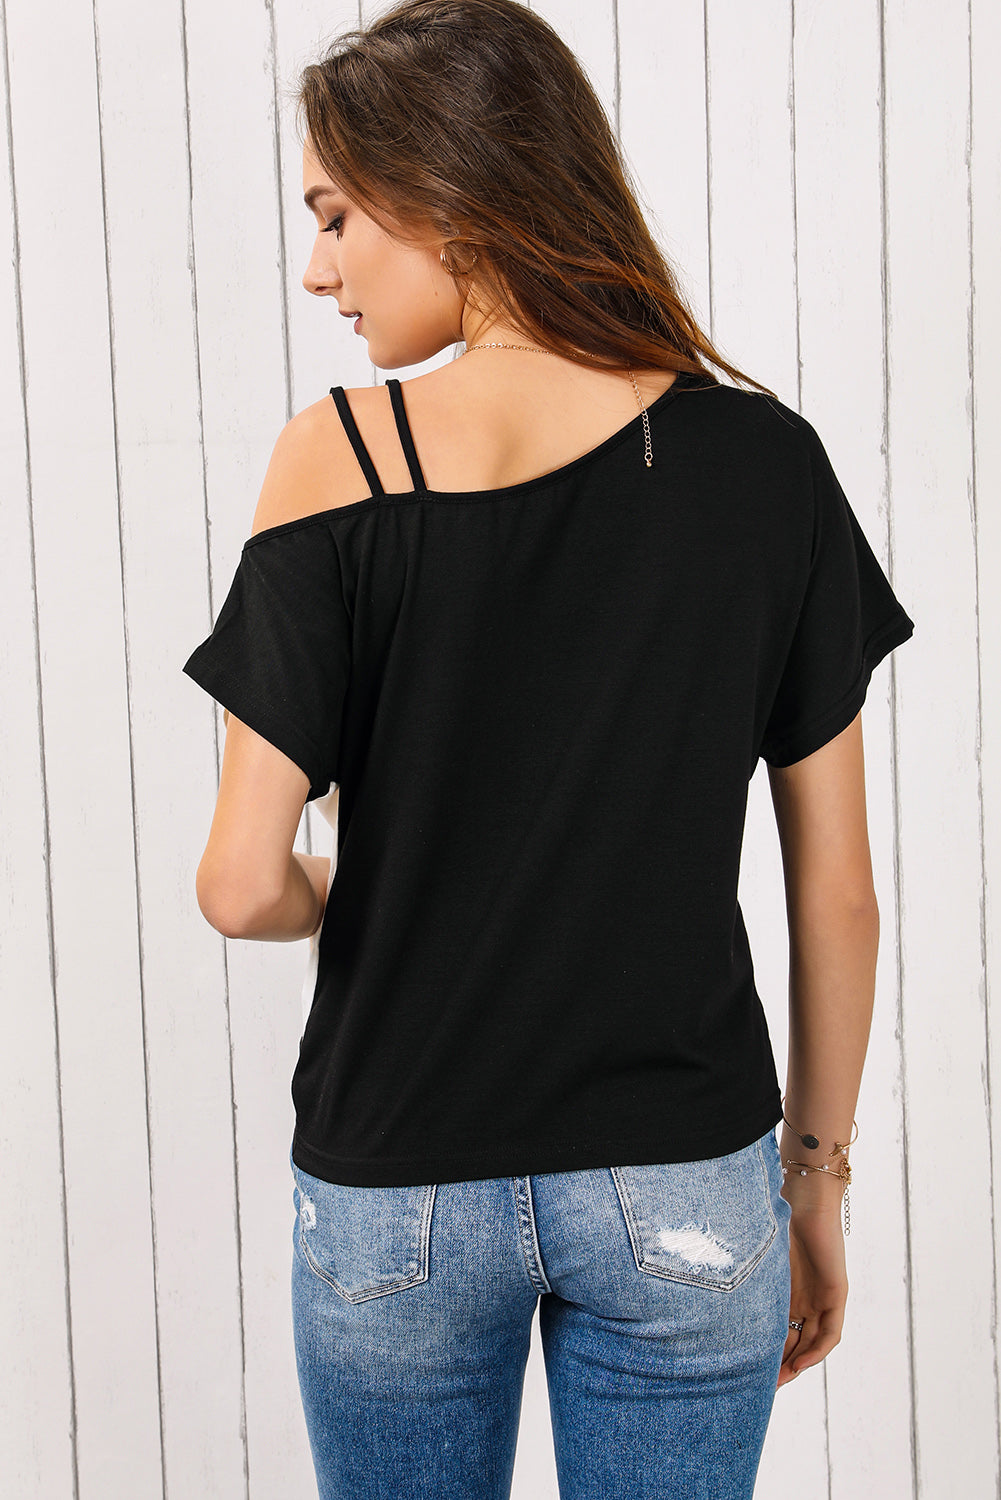 Contrast Twisted Asymmetrical Neck Top